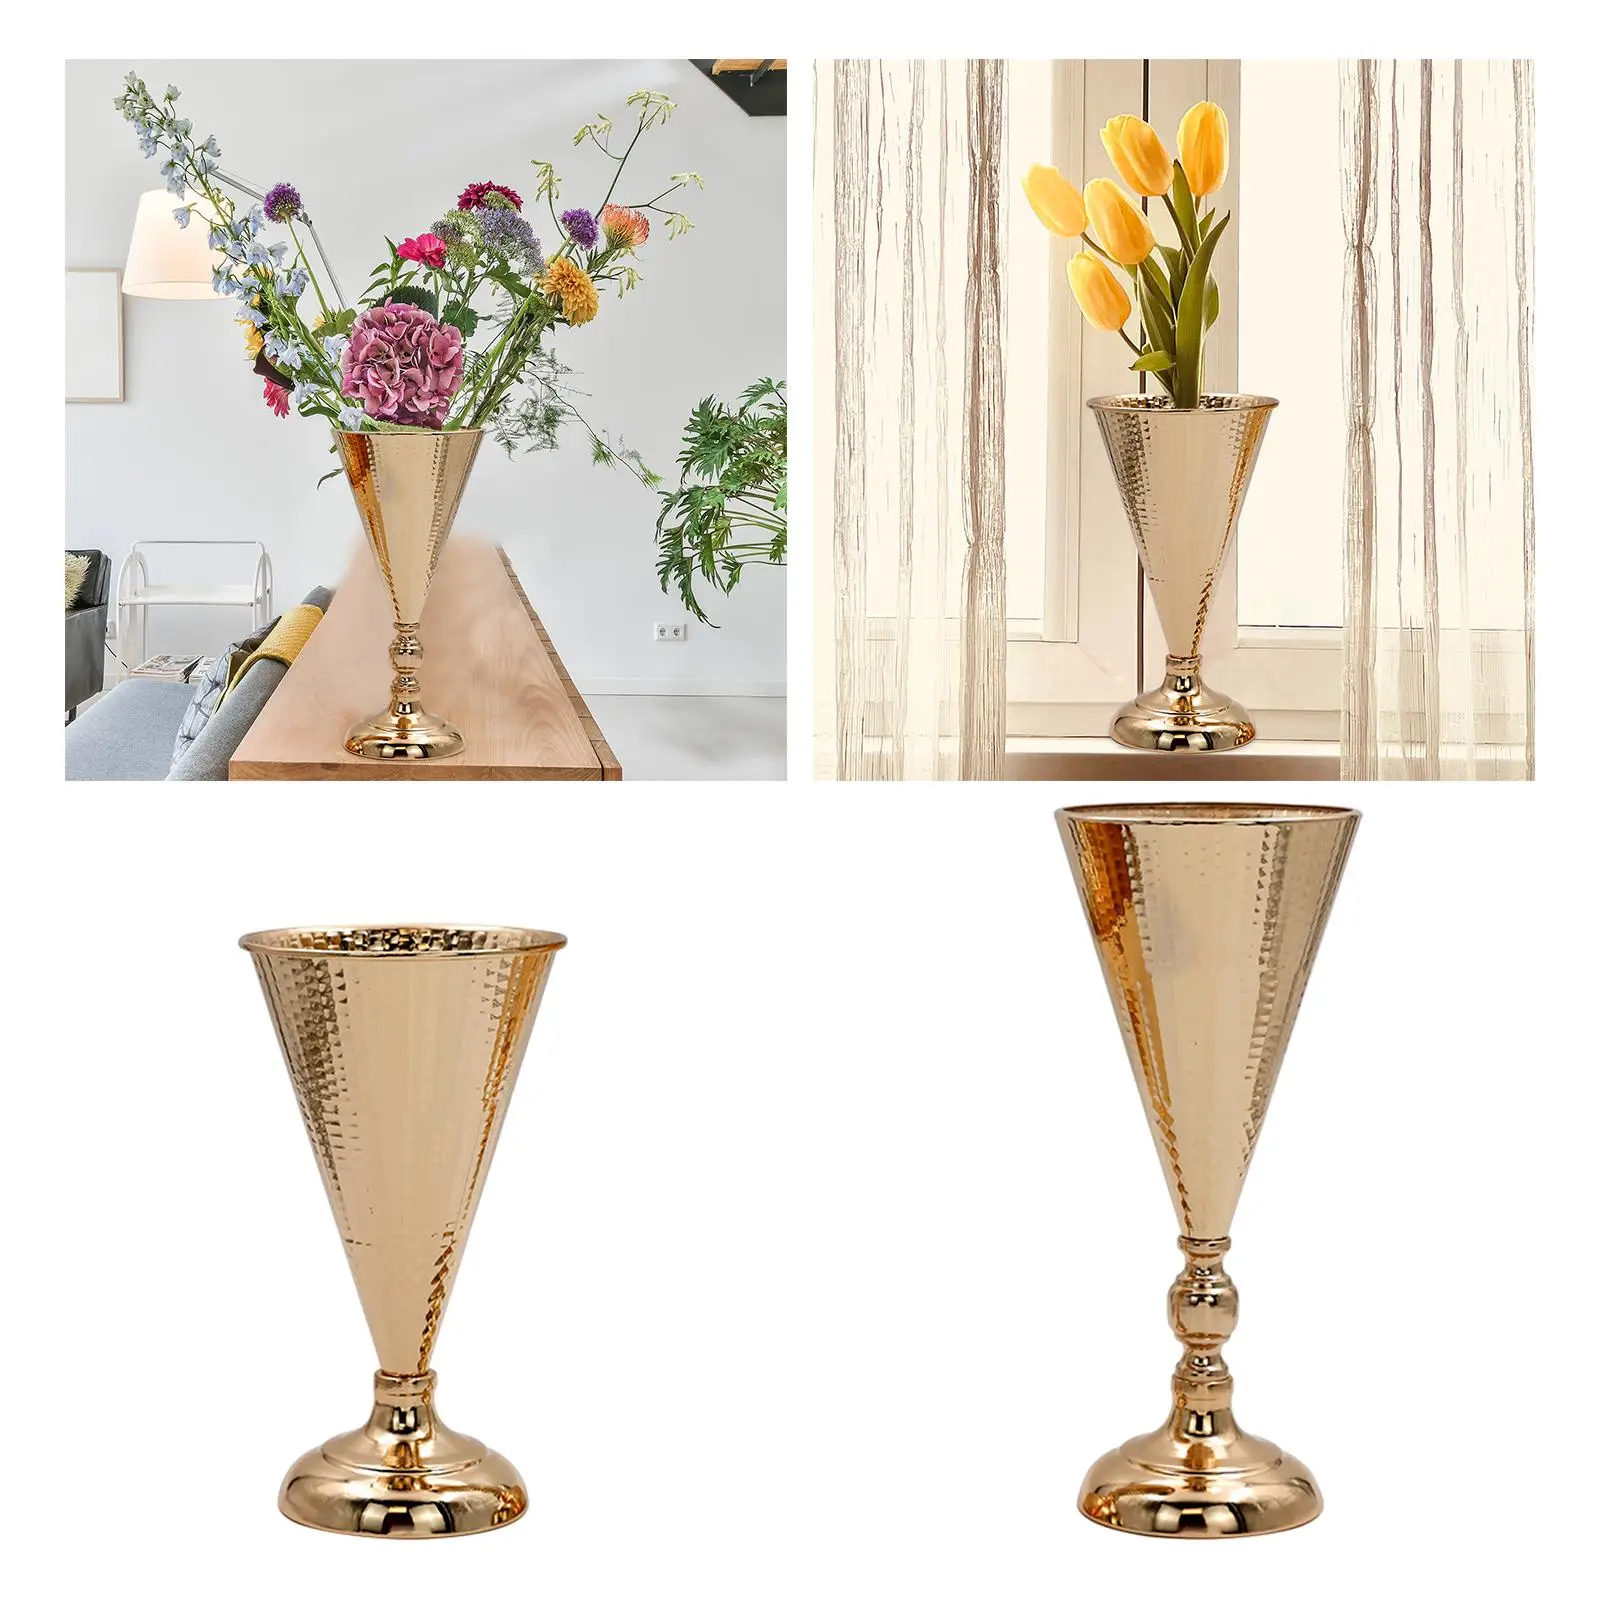 Flower Vase Dried Flower Pot Tabletop Decor Holder Wedding Table Centrepieces for Home Office Wedding Party Holiday Restaurant